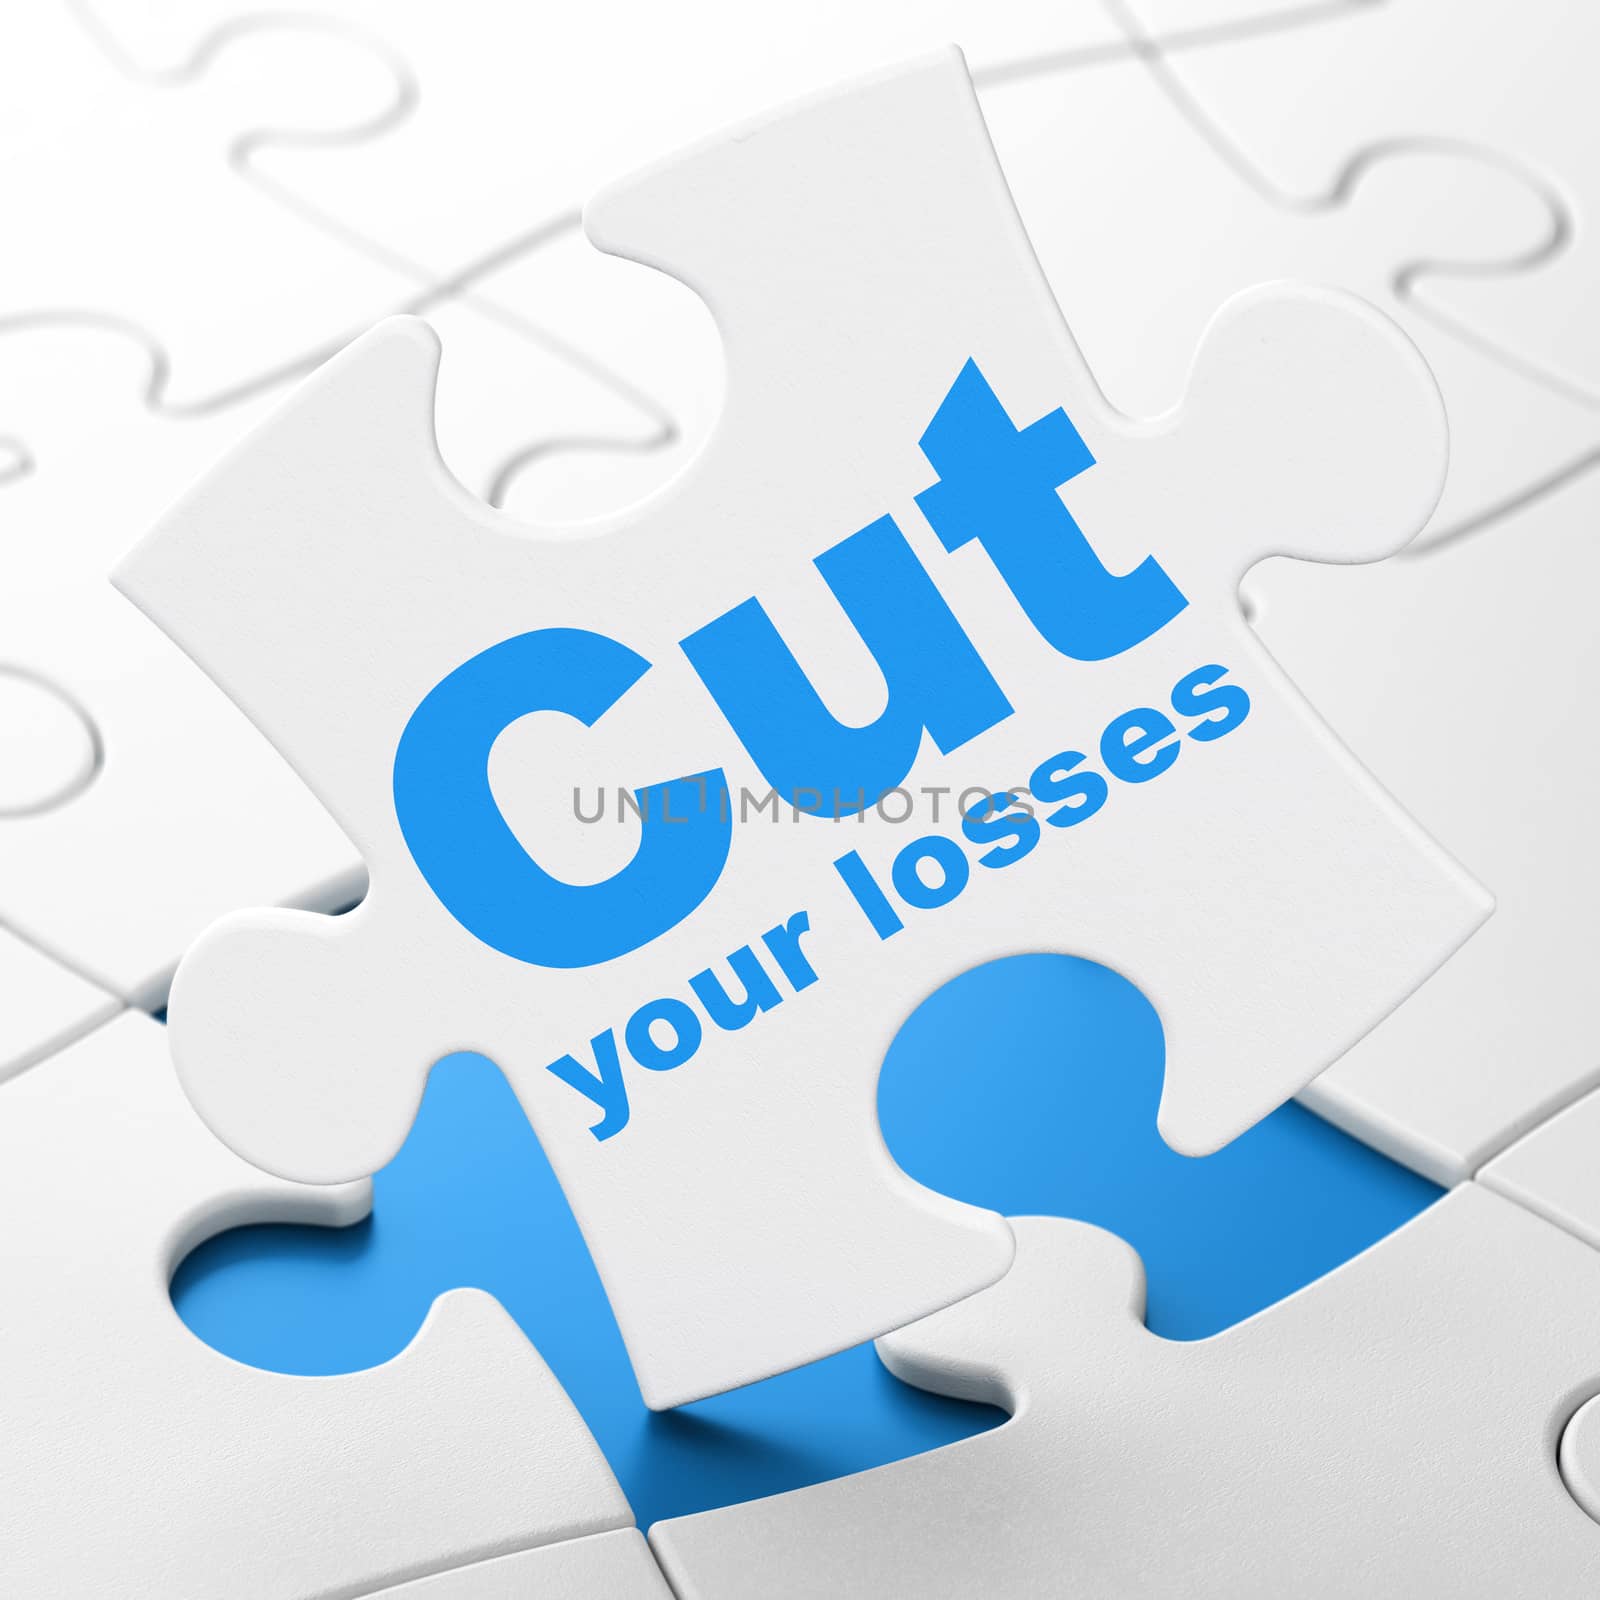 Business concept: Cut Your losses on puzzle background by maxkabakov